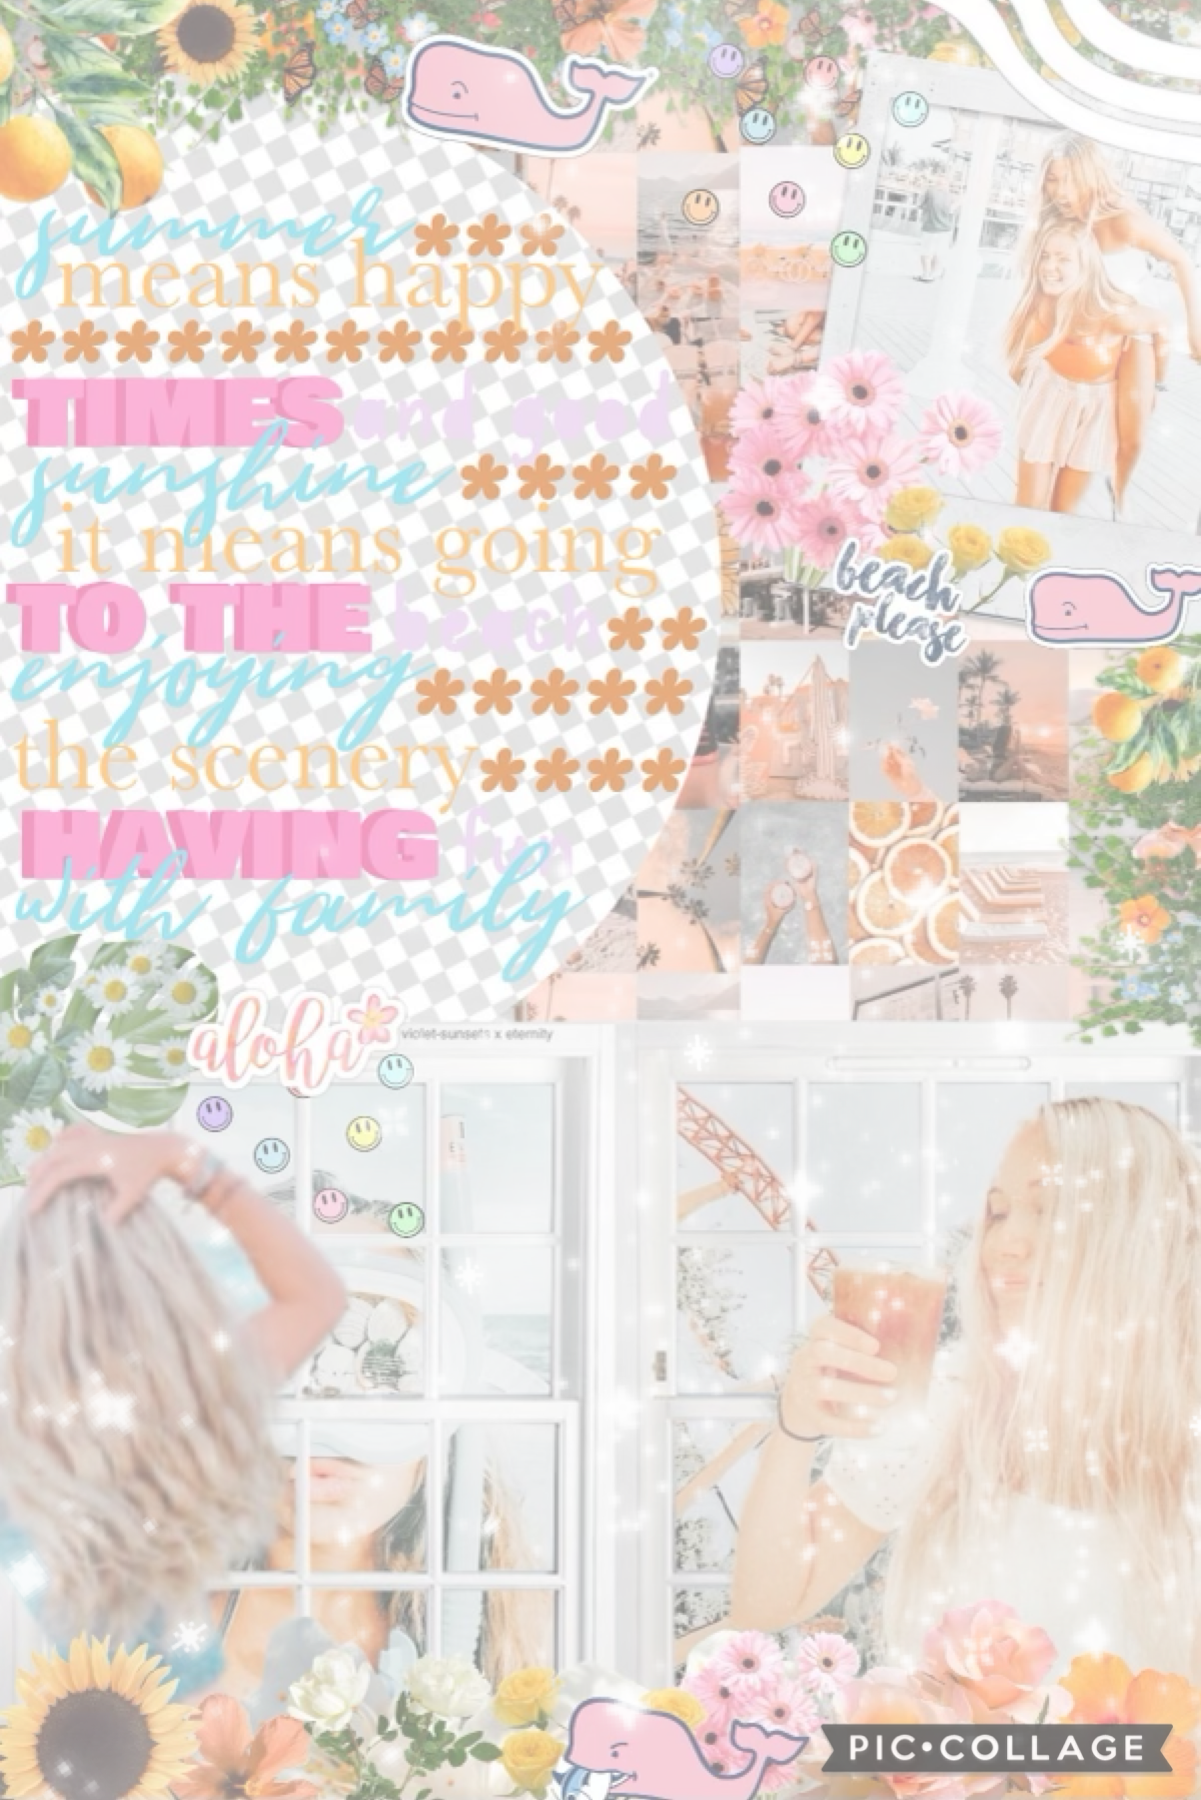 🏄‍♀️6/16/22🏄‍♀️ tap!
collab with -eternity-! i did the bg and she did the text! my allergies suck 🤧. qotd: what's your favorite food? i like pizzzzza 🍕